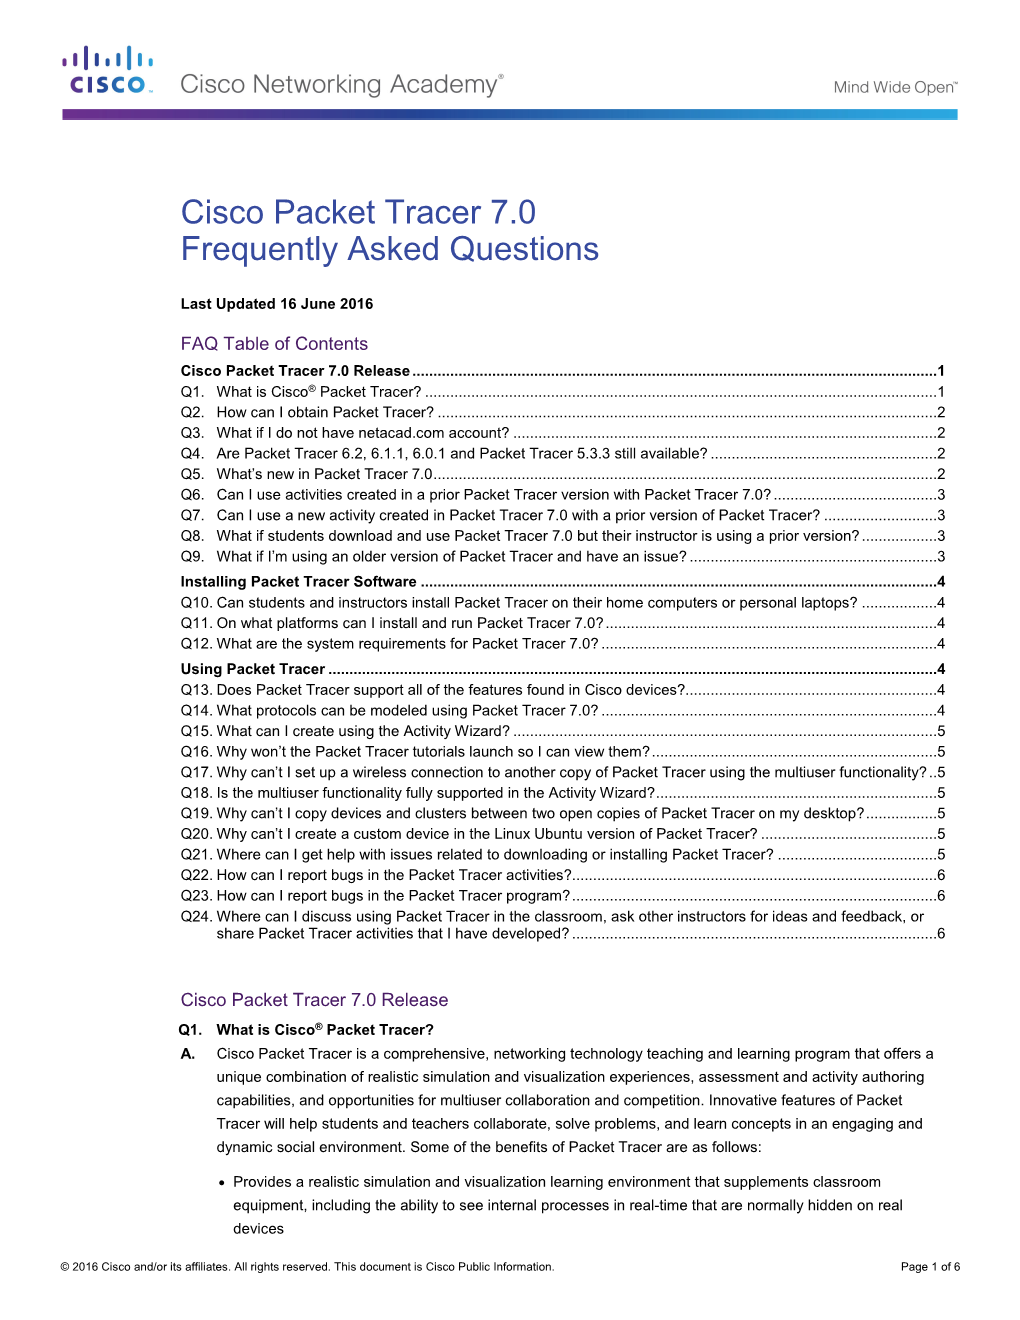 Cisco Packet Tracer 7.0 Frequently Asked Questions